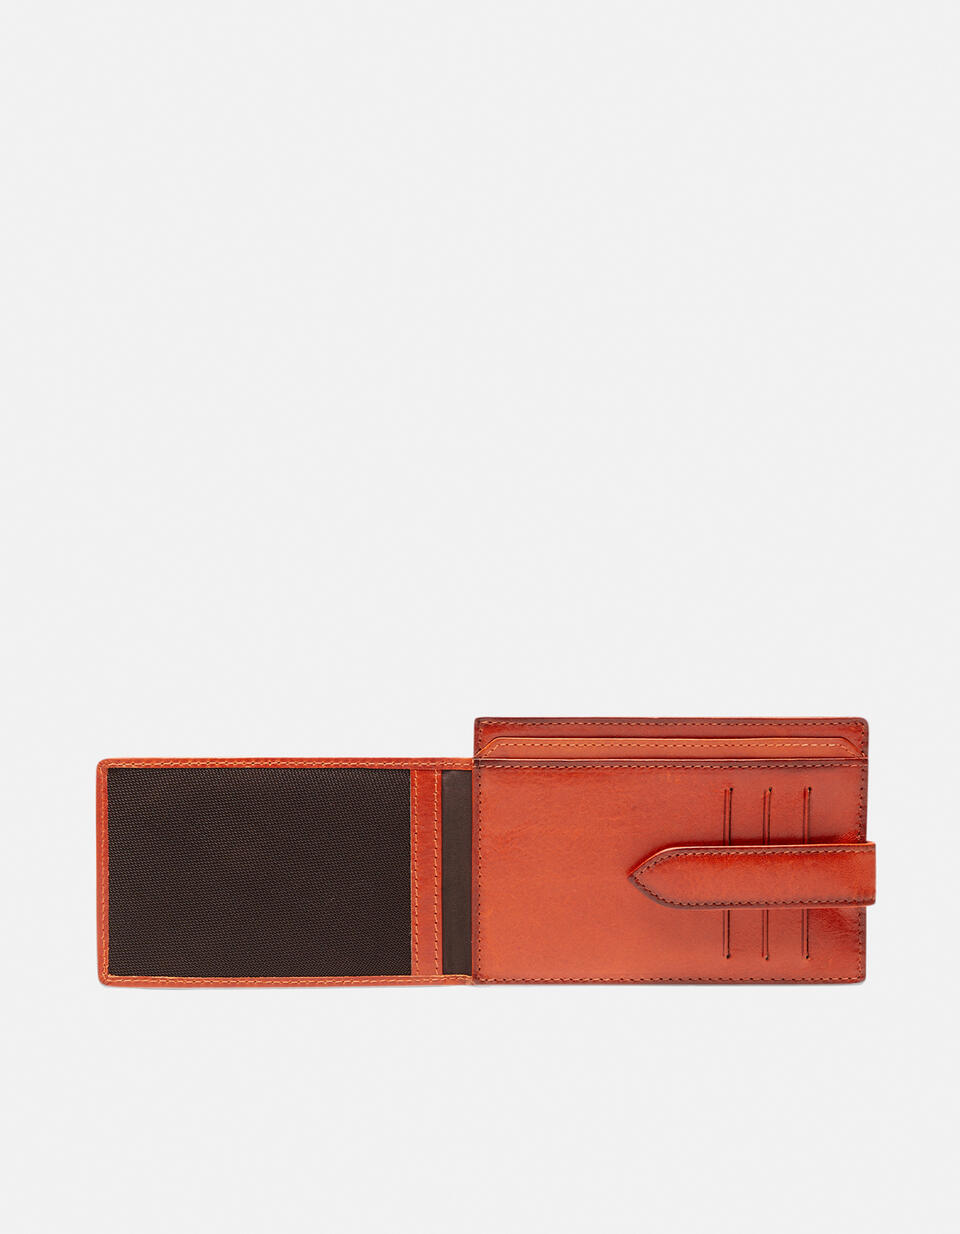 Warm and Color Anti-RFID cardholder - Women's Wallets - Men's Wallets | Wallets ARANCIO - Women's Wallets - Men's Wallets | WalletsCuoieria Fiorentina